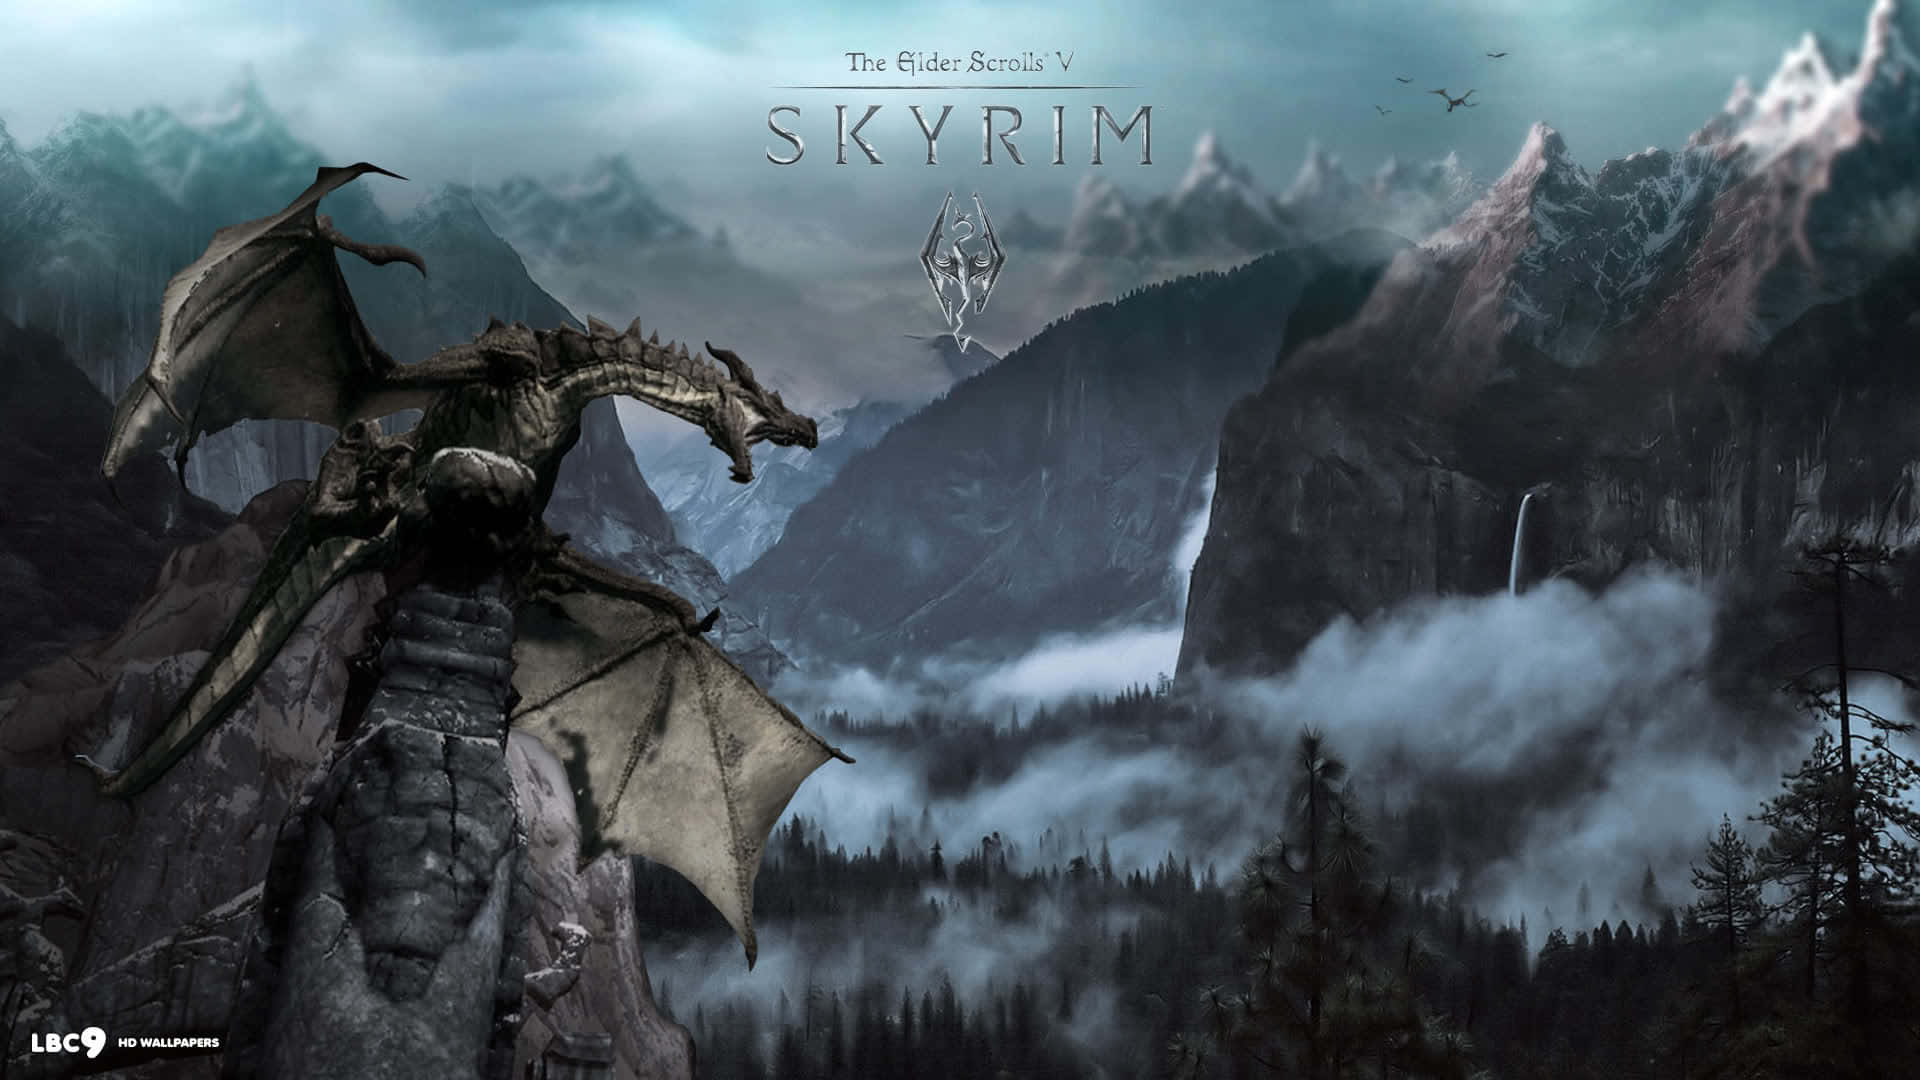 The wise dragon Paarthurnax in the world of Skyrim Wallpaper